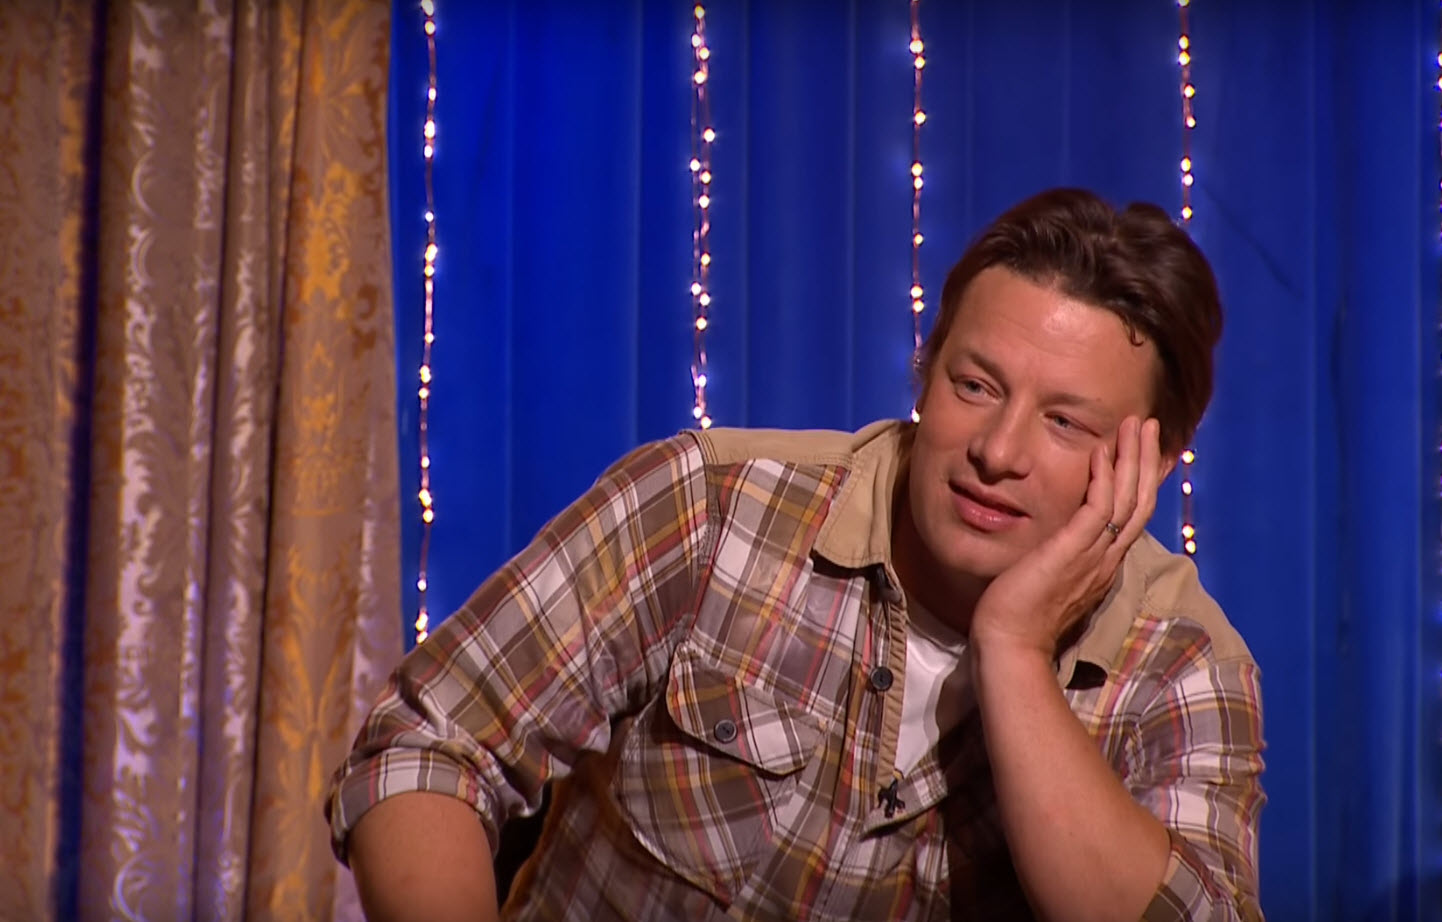 Watch what happens when Jamie Oliver’s phone gets hacked